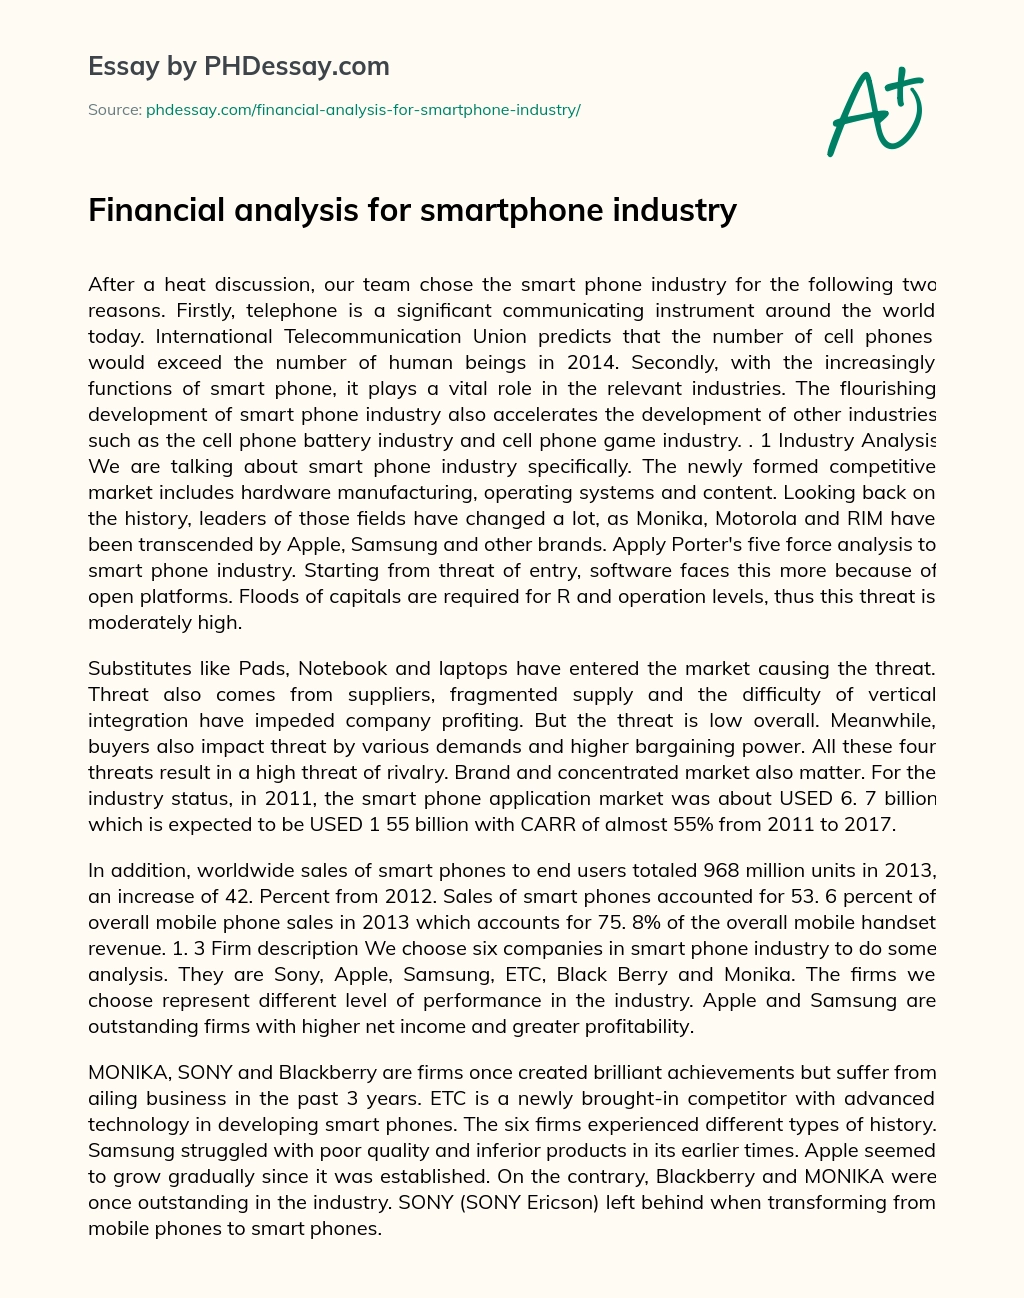 Financial analysis for smartphone industry essay